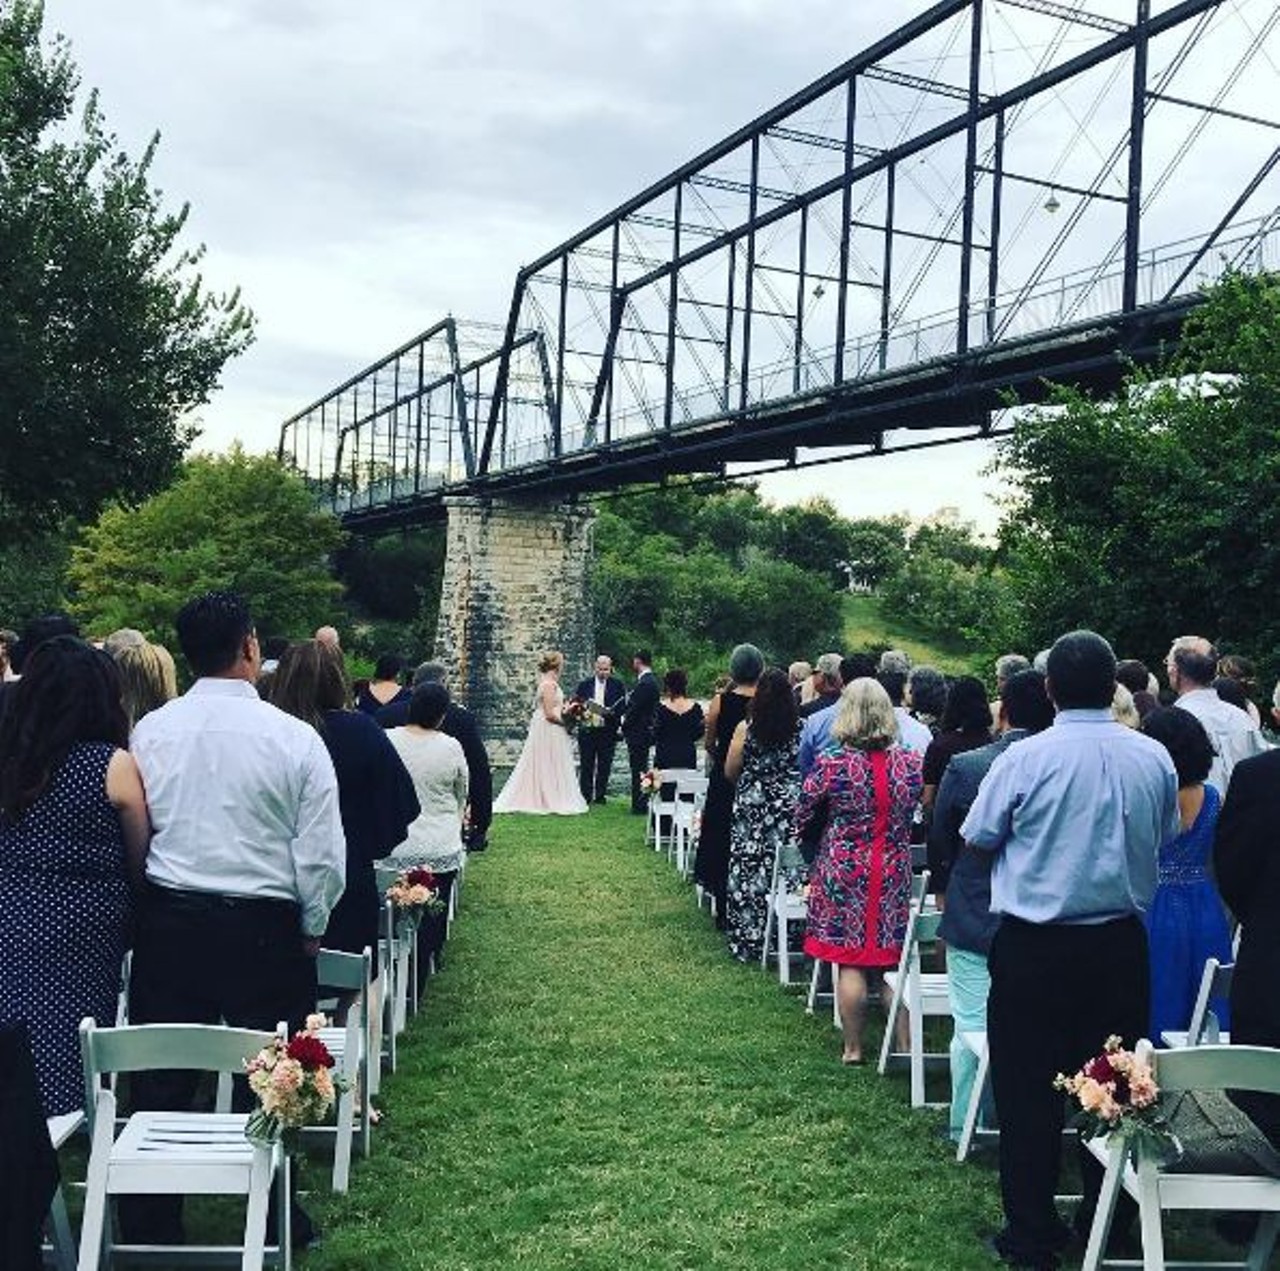 Milltown Historic District
The River Venue lets you get hitched along the majestic falls of the Guadalupe River with the 1887 Faust Street Bridge in the backdrop.
561 Oasis St, New Braunfels, milltownhistoricdistrictnb.com
Photo via Instagram, djbrianweber13